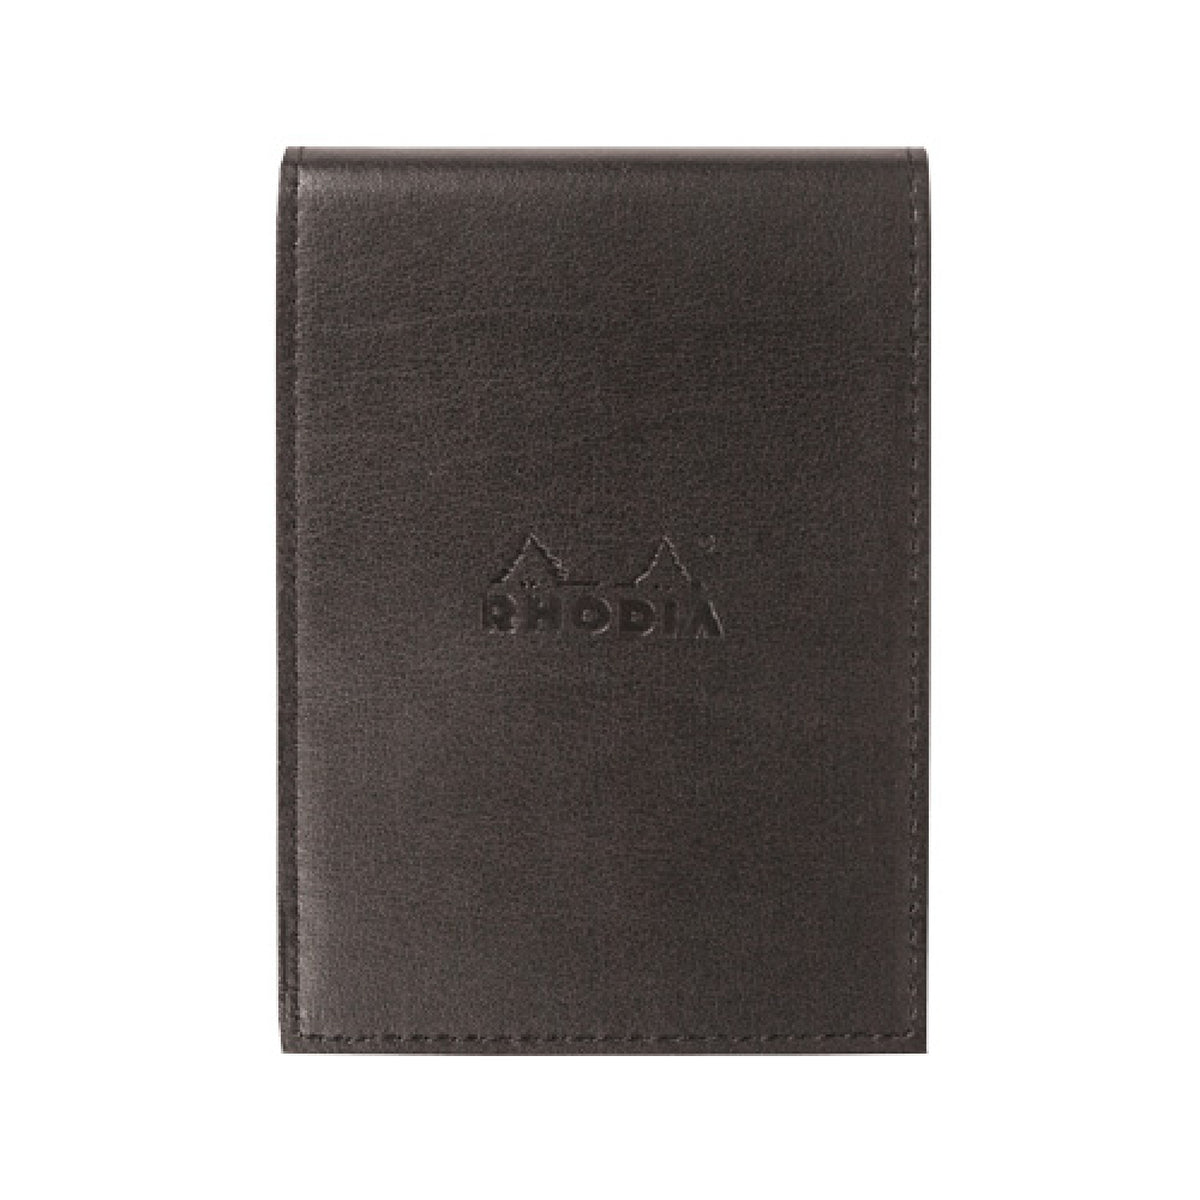 Rhodia Pad Holders. Lightly grained leatherette covers. Comes complete with one Orange Rhodia pad #11 Graph. Inner pocket for notes & receipts.  Measures 3 ½ x 4 ½ 80 Sheets (160 Pages) Graph Paper White Acid-Free Paper Paper Weight: 80 GSM Black Leatherette Cover Holds Rhodia #11 Size Pads